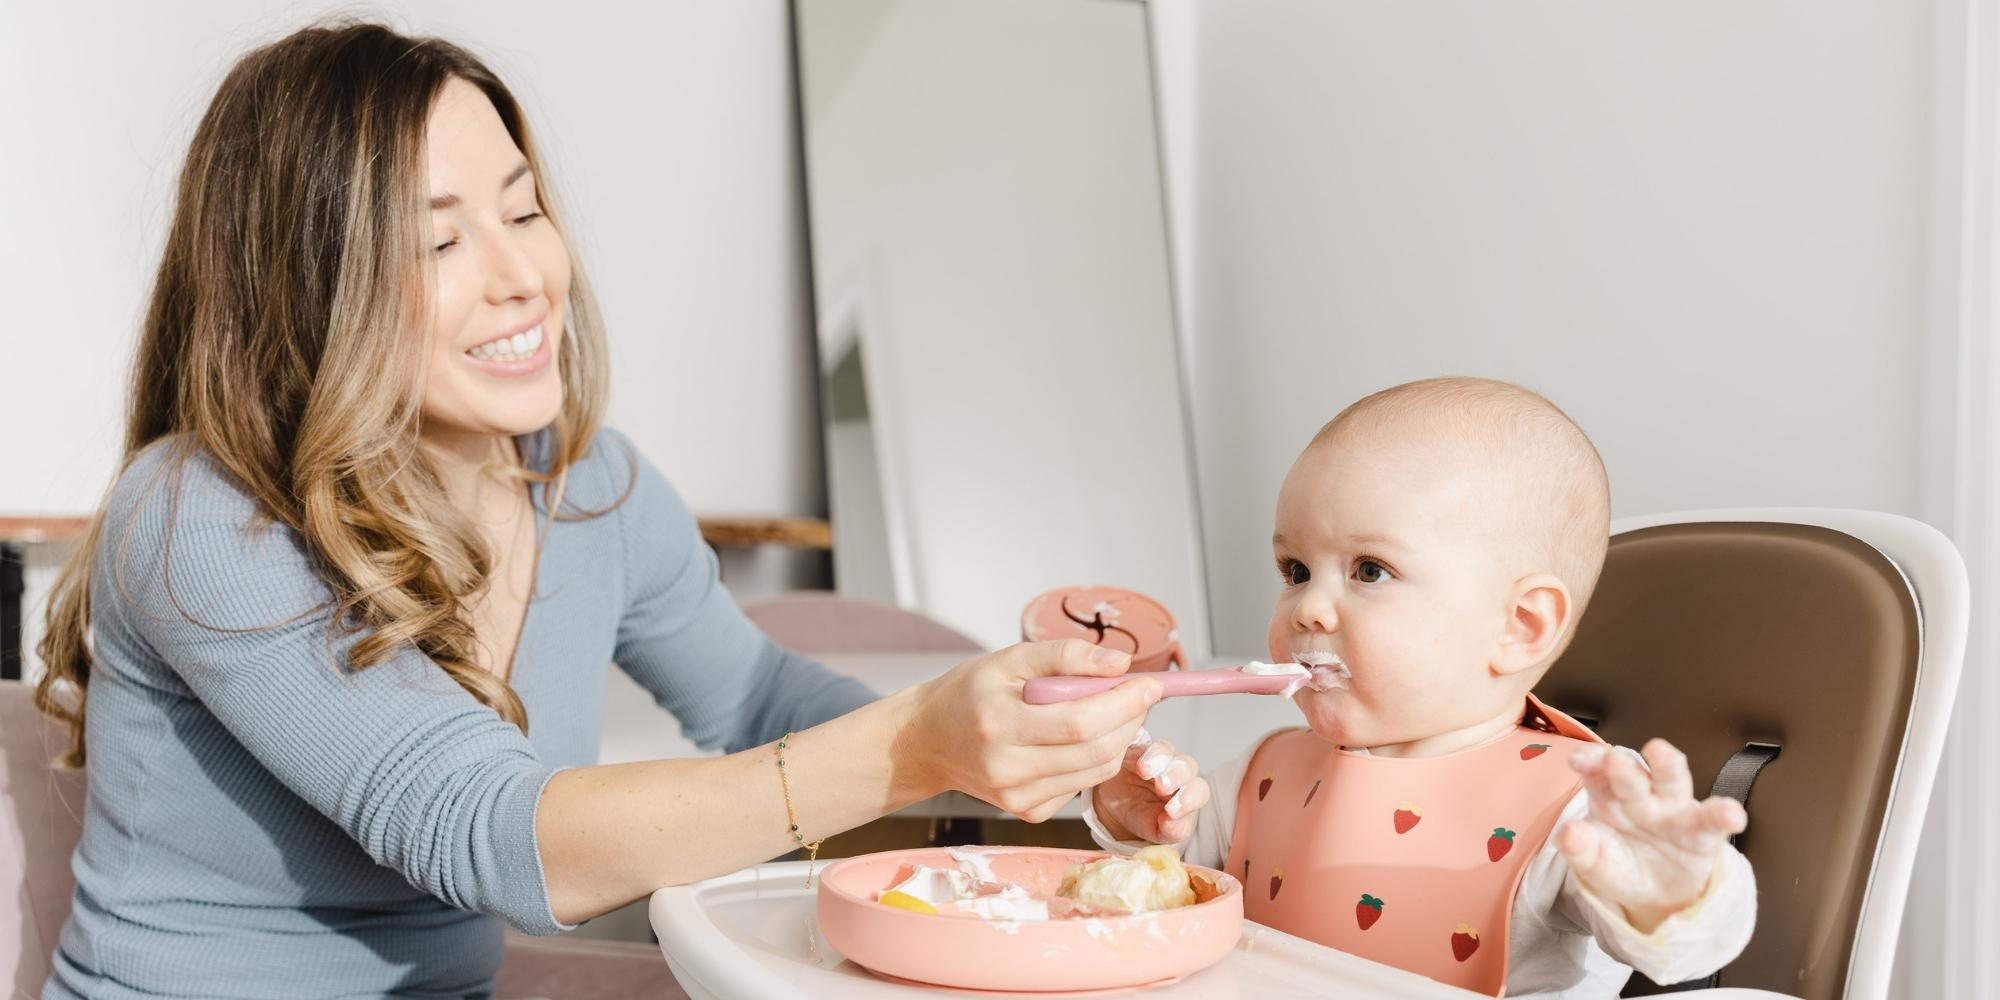 Baby-led weaning: 'Why I let my six month old feed herself